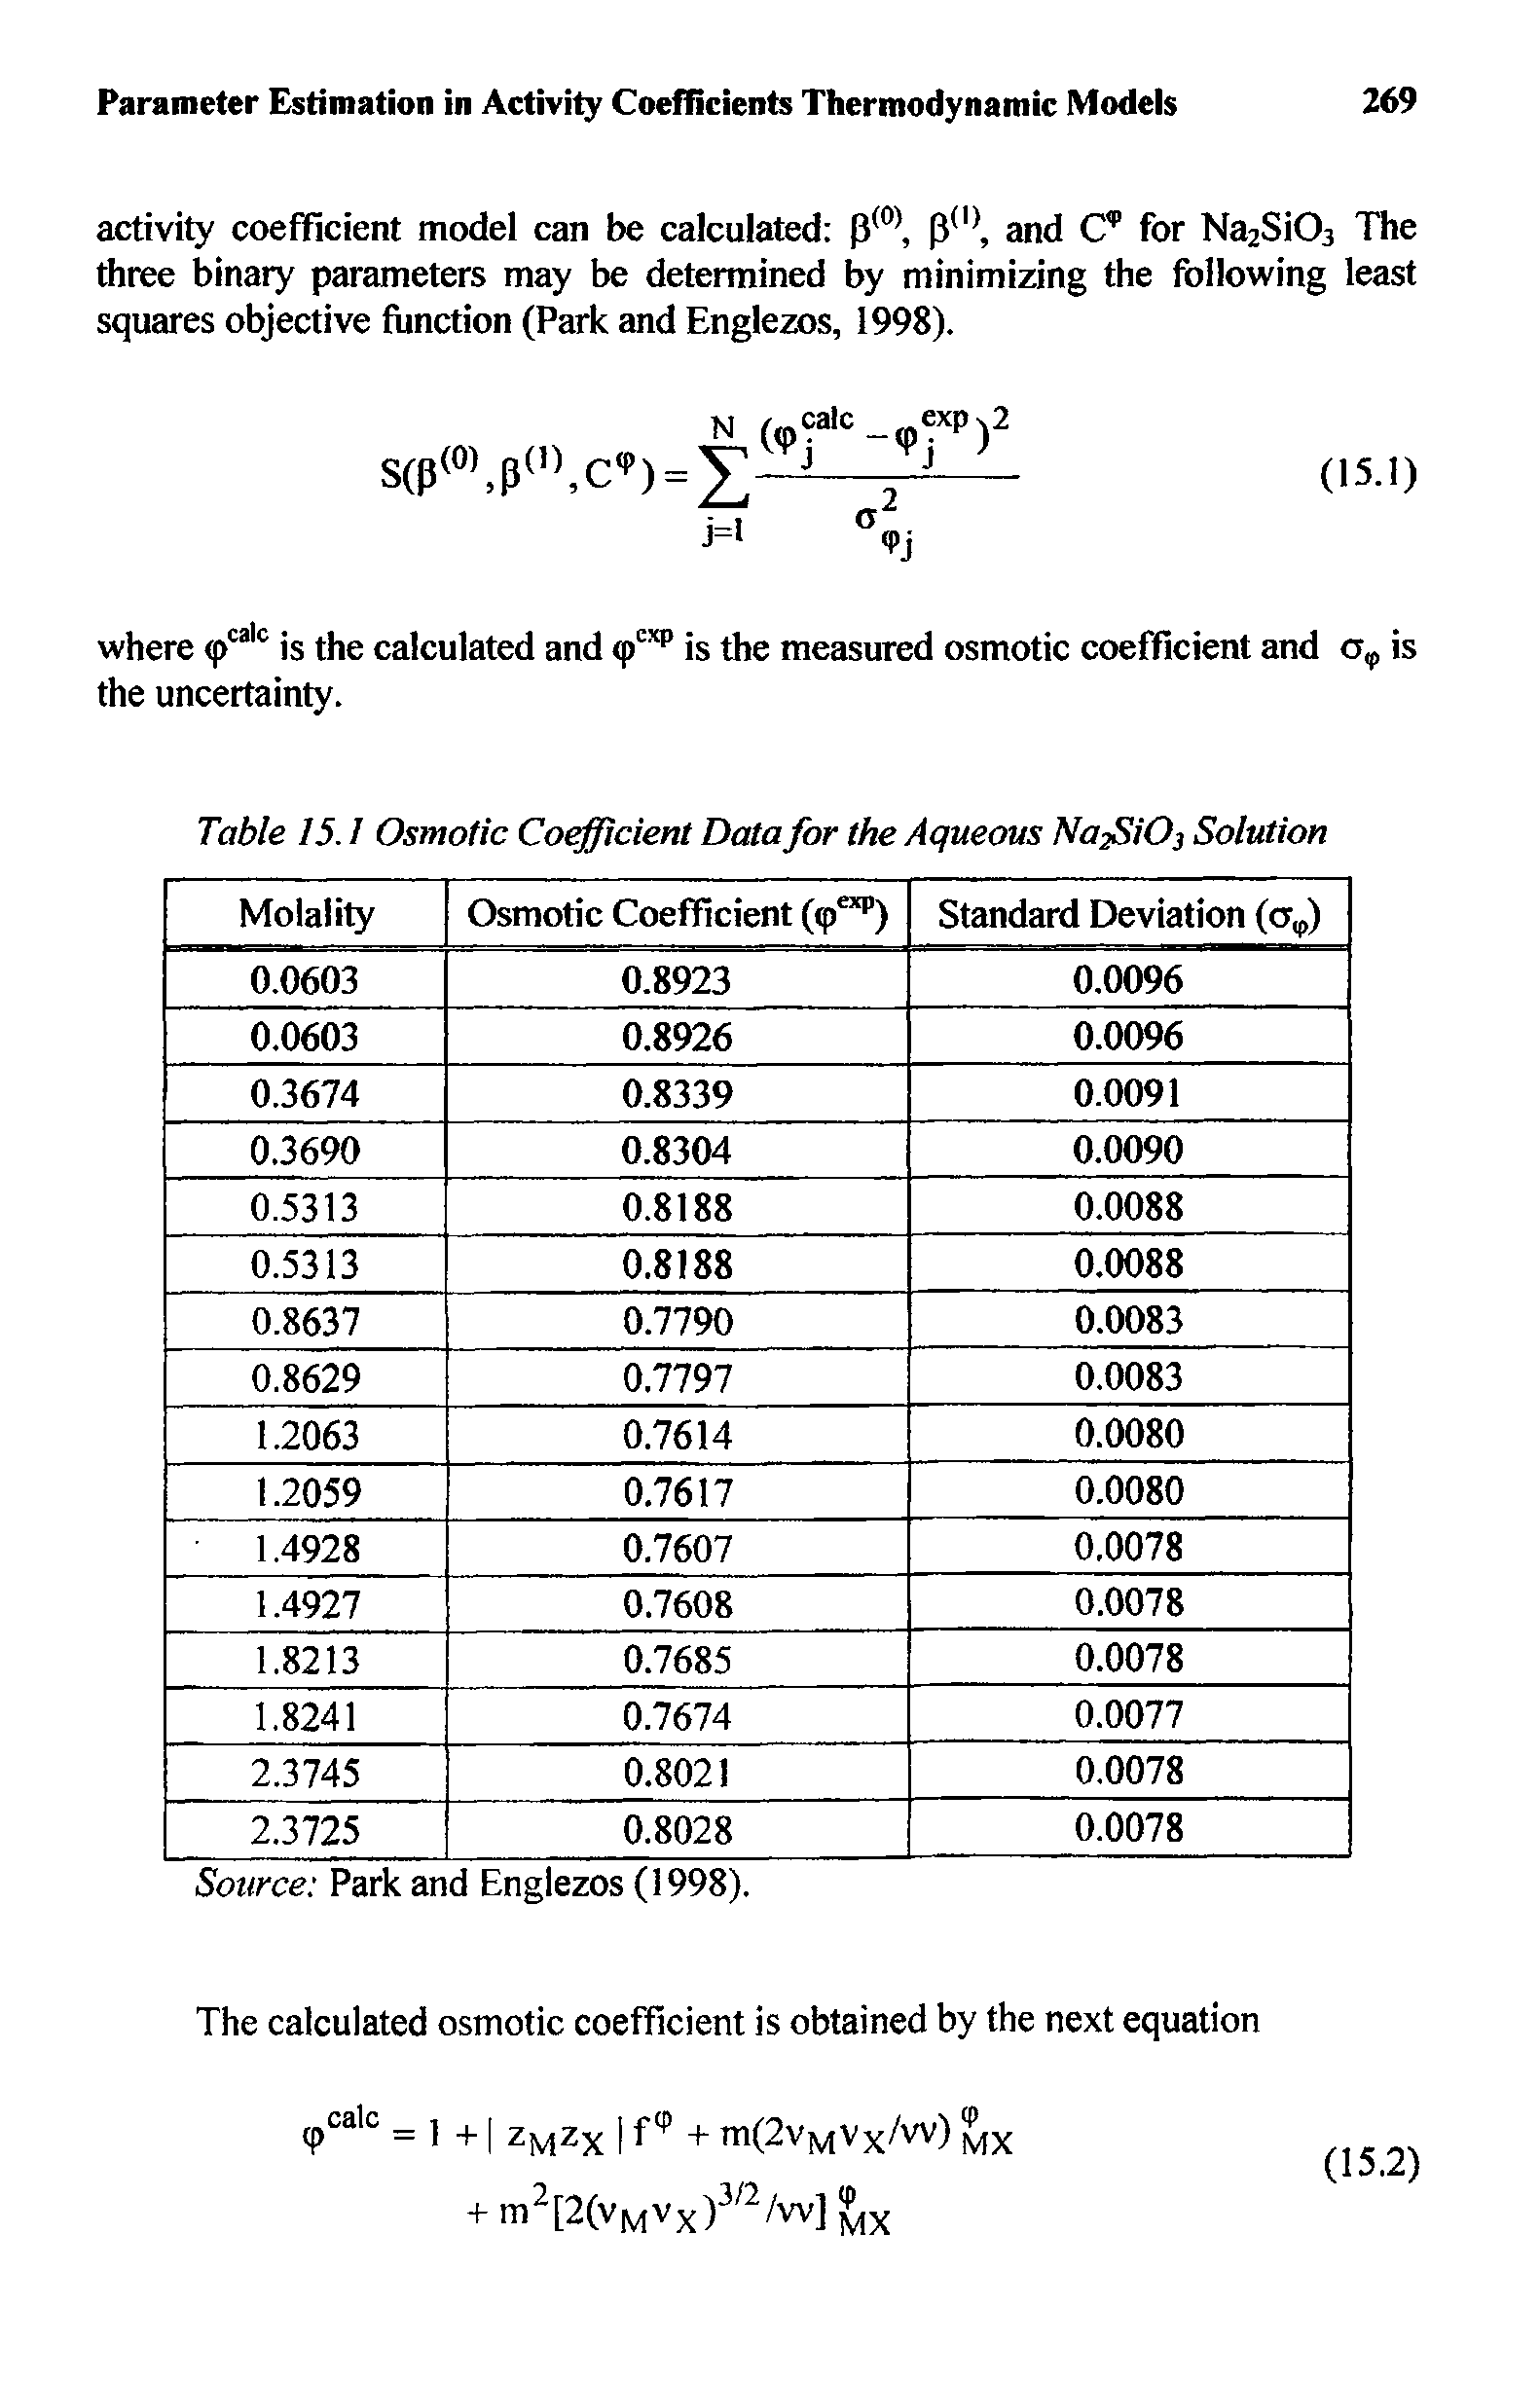 Table 15.1 Osmotic Coefficient Data for the Aqueous Naf>iO Solution...